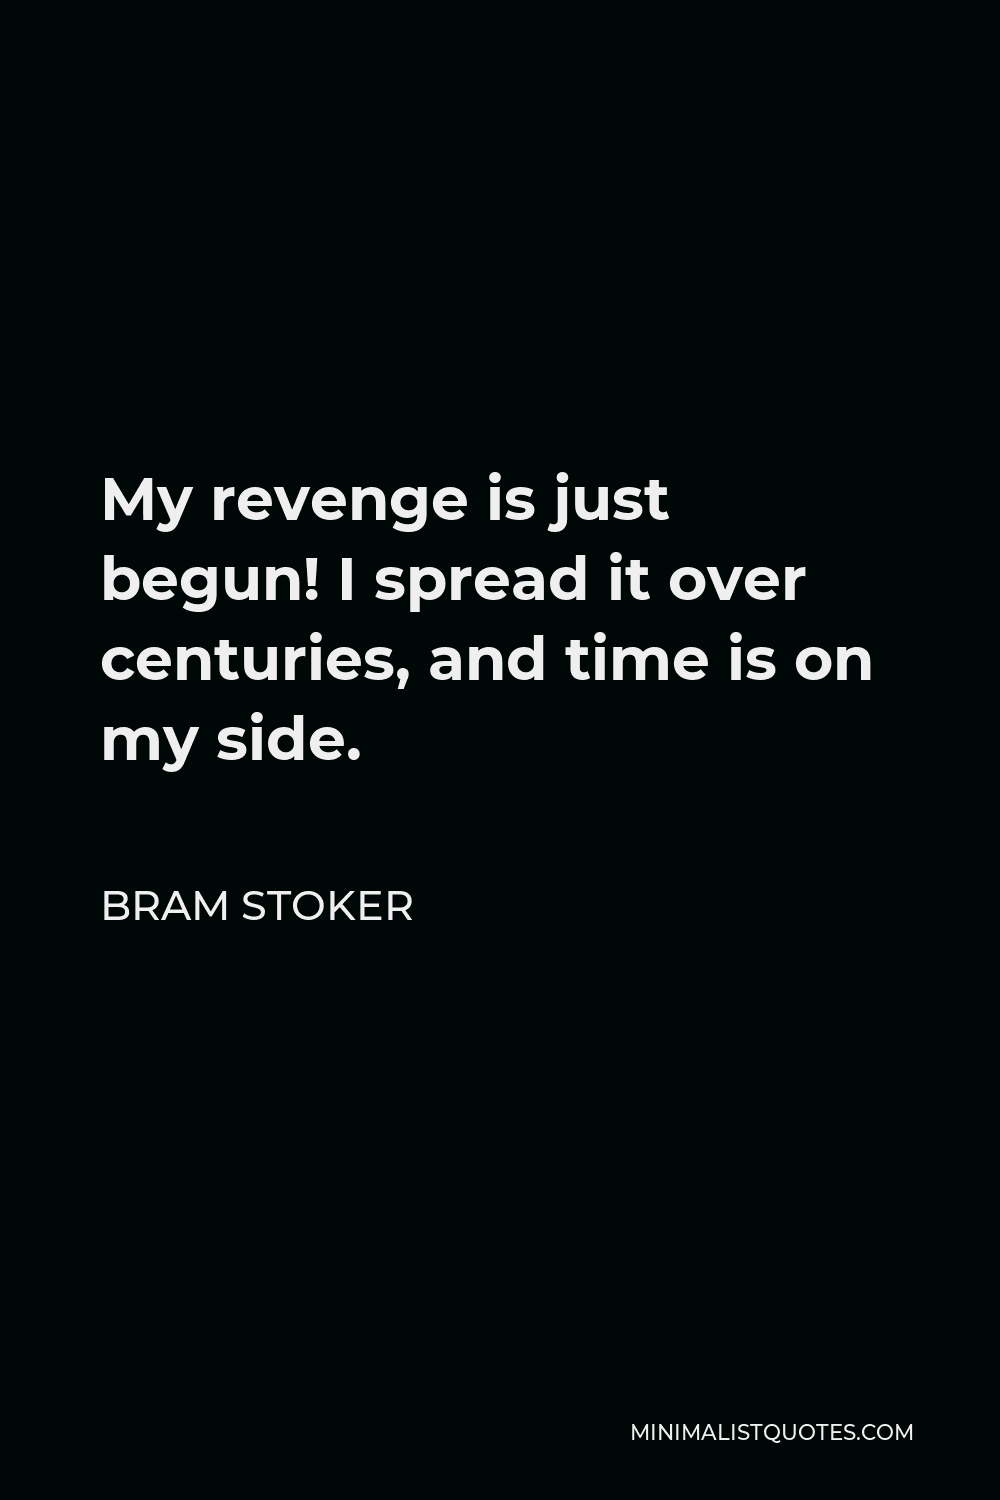 Bram Stoker Quote - My revenge is just begun! I spread it over centuries, and time is on my side.